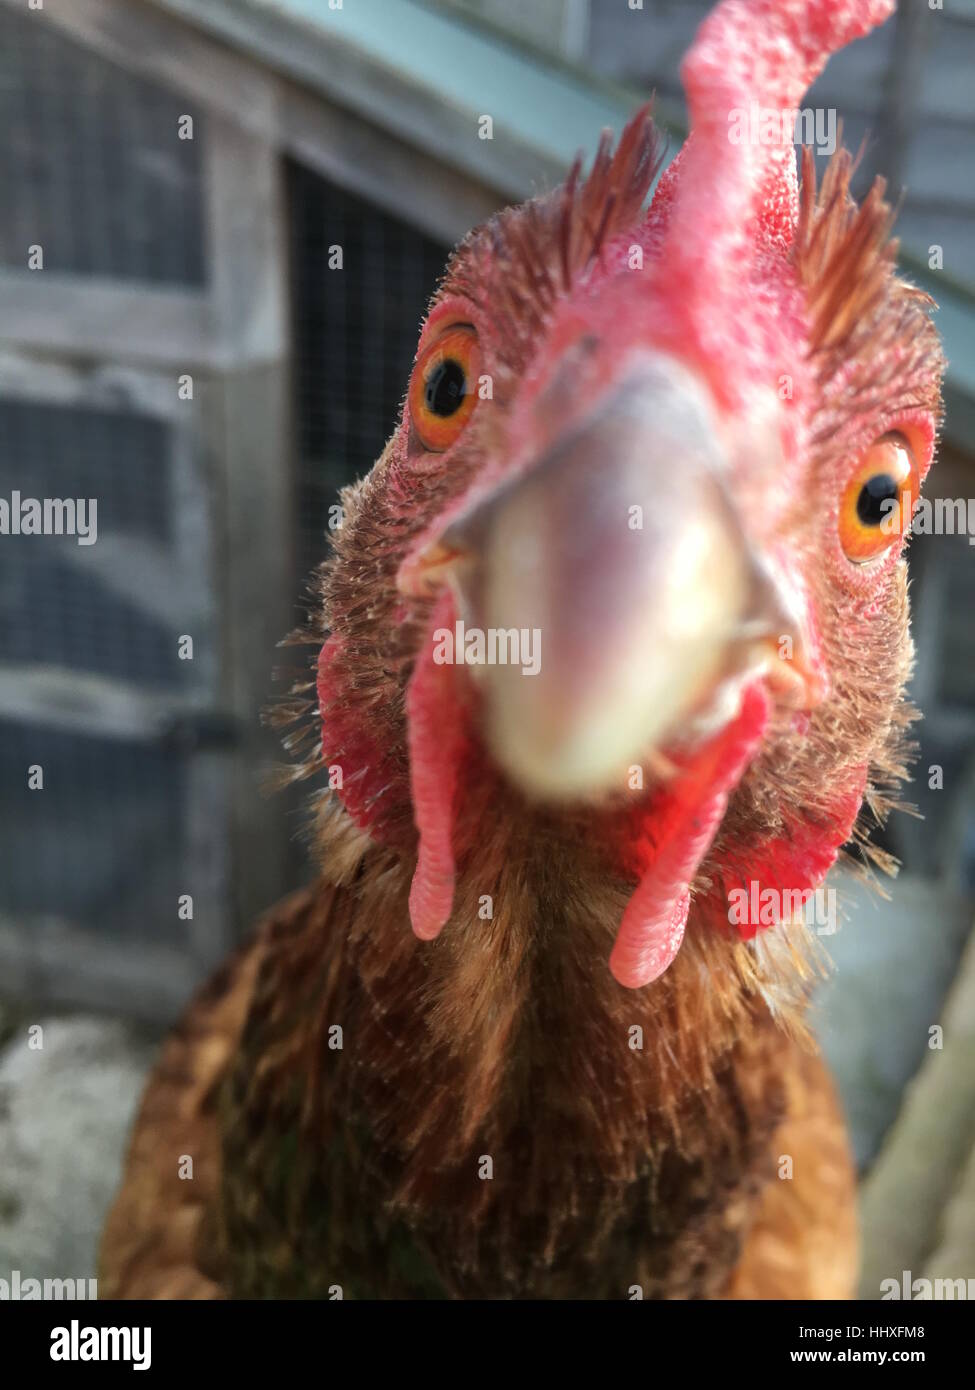 close up of chickens face Stock Photo